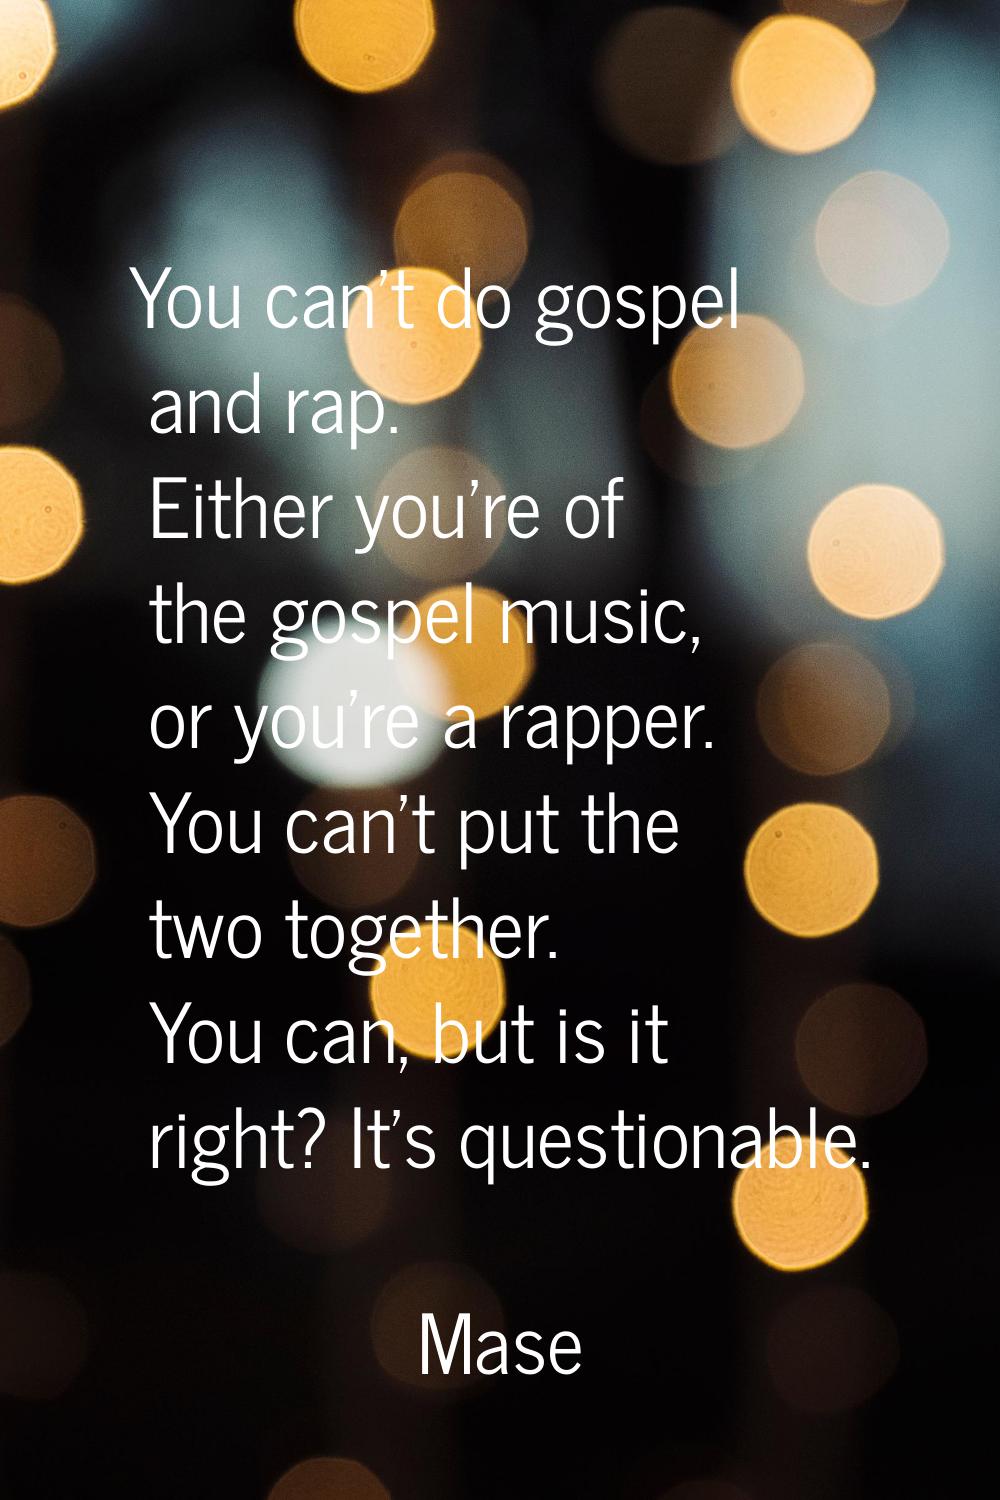 You can't do gospel and rap. Either you're of the gospel music, or you're a rapper. You can't put t